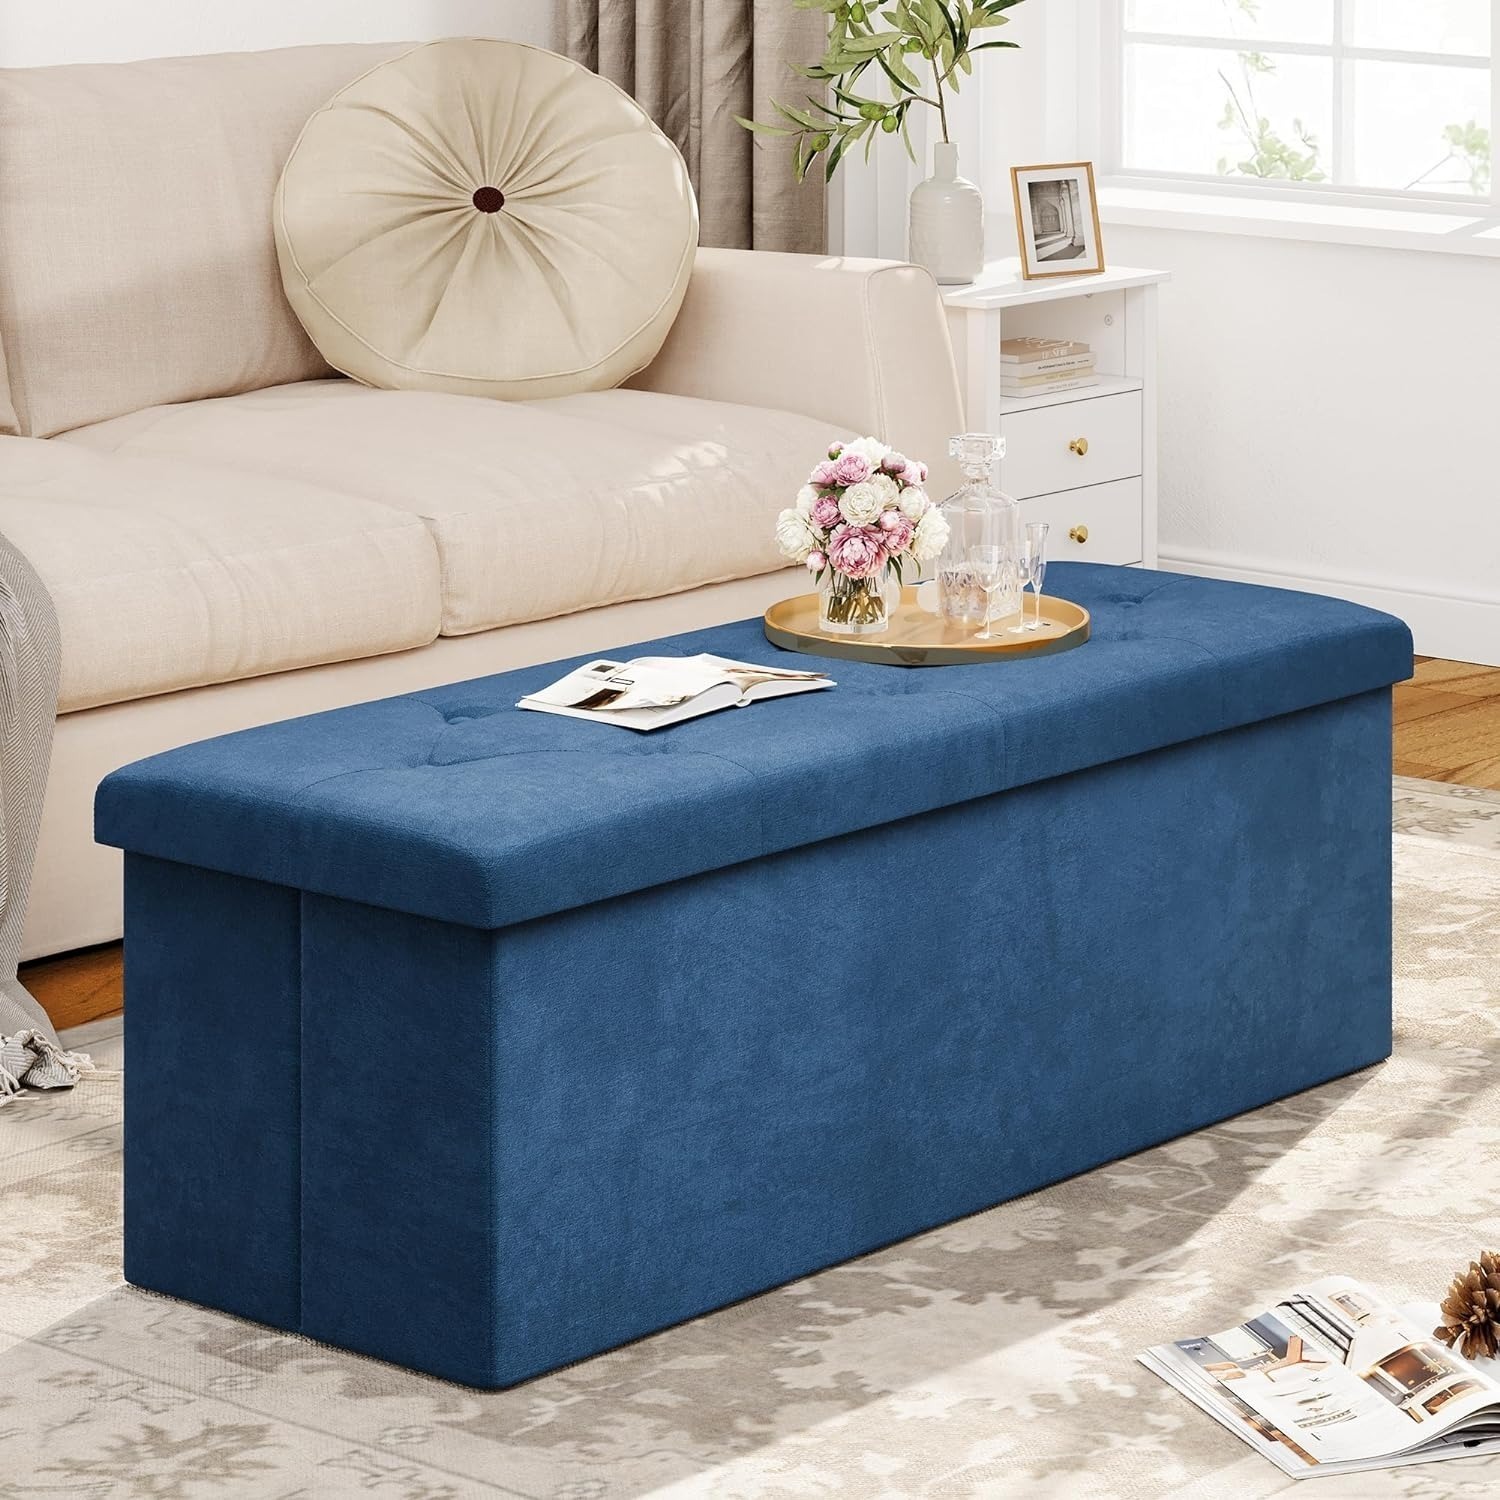 YITAHOME 43 Inches Folding 120L Storage Ottoman Bench $28.37+ Free Shipping